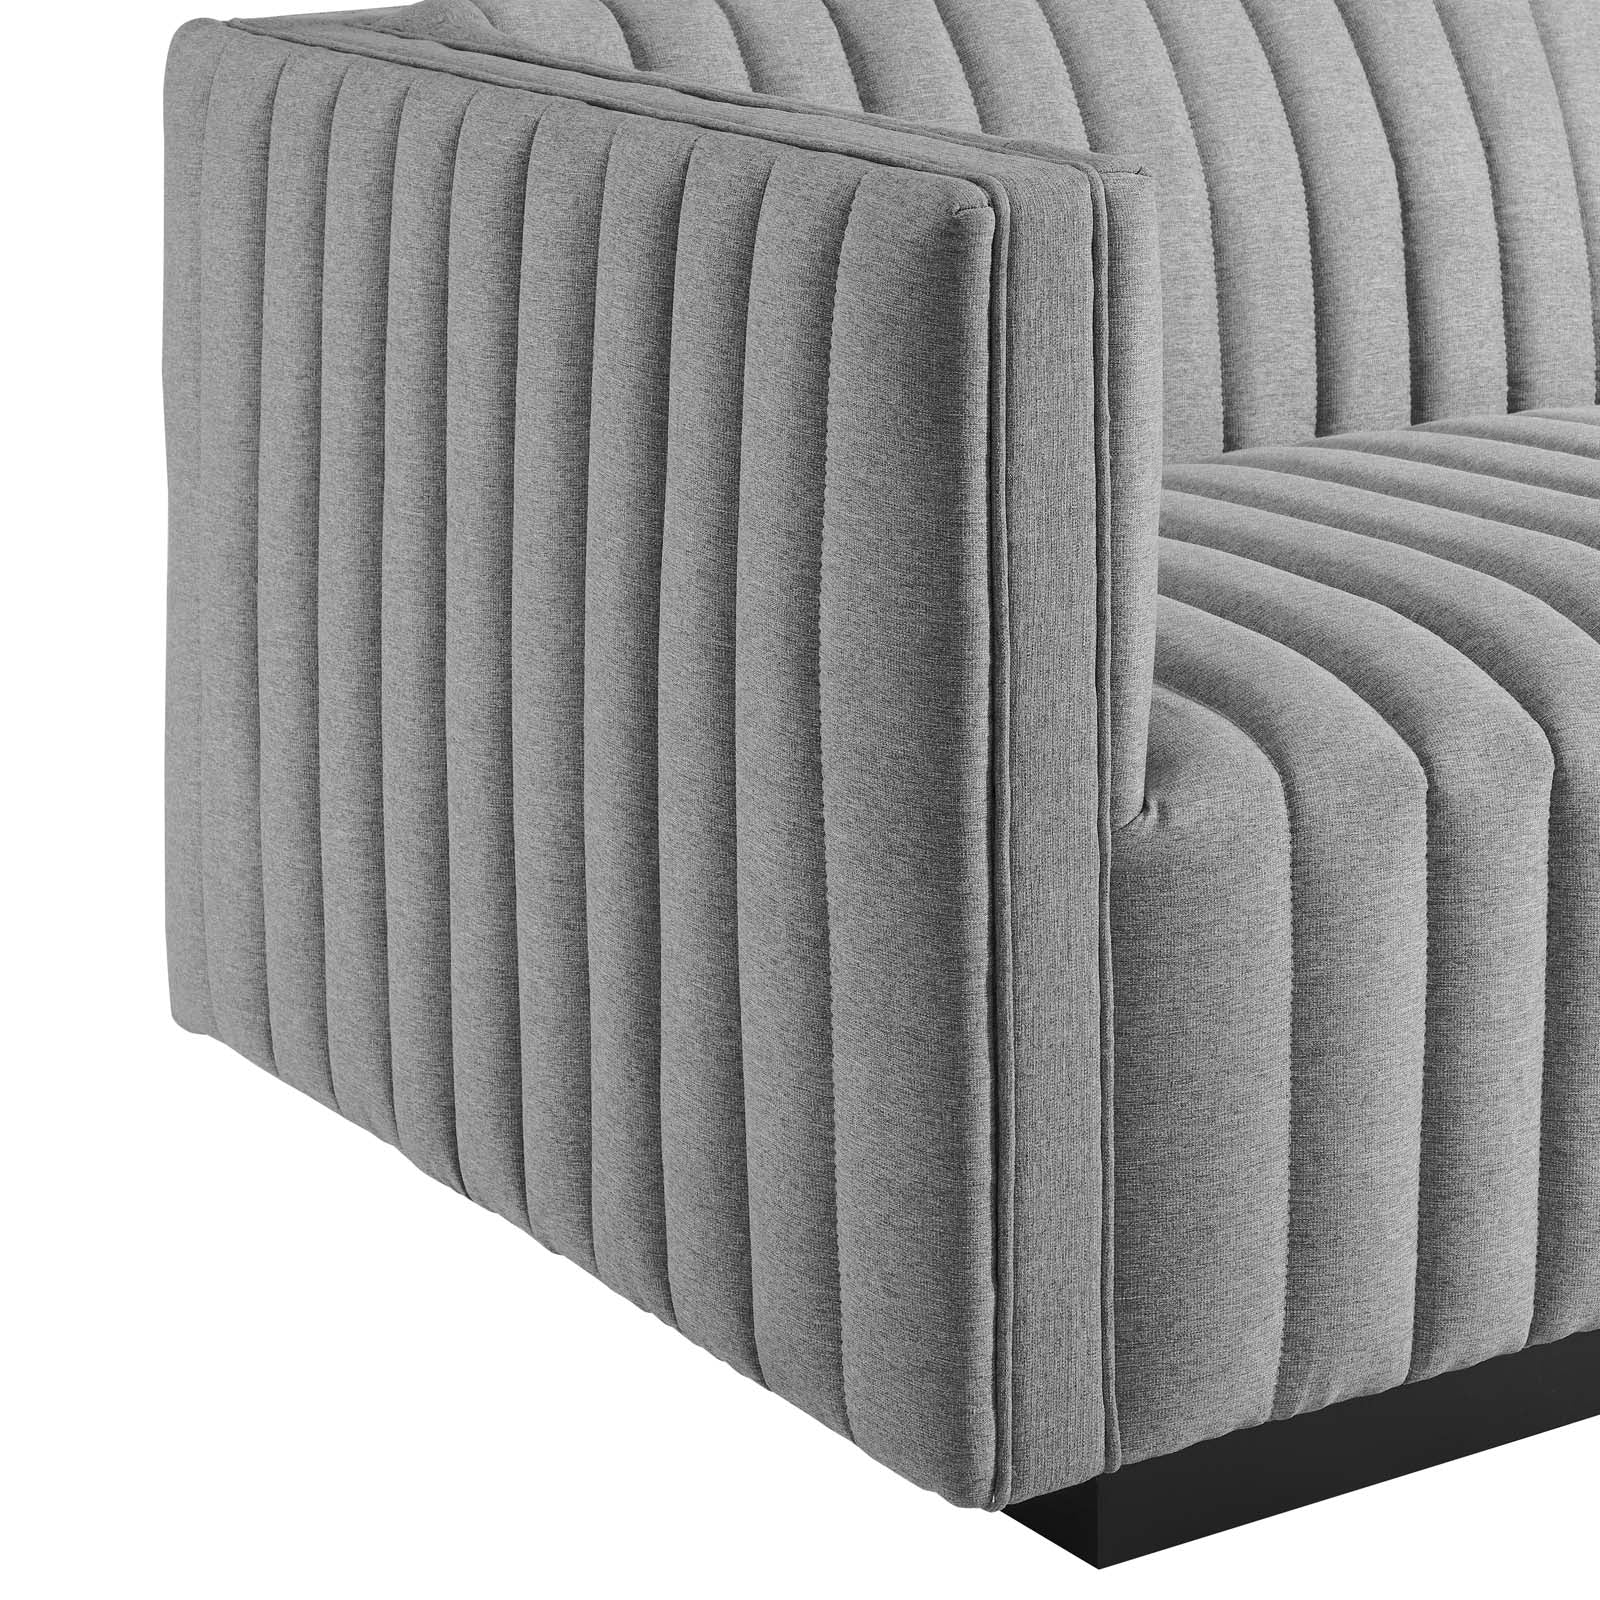 Modway Sectional Sofas - Conjure Channel Tufted Upholstered Fabric 6-Piece U-Shaped Sectional Black Light Gray